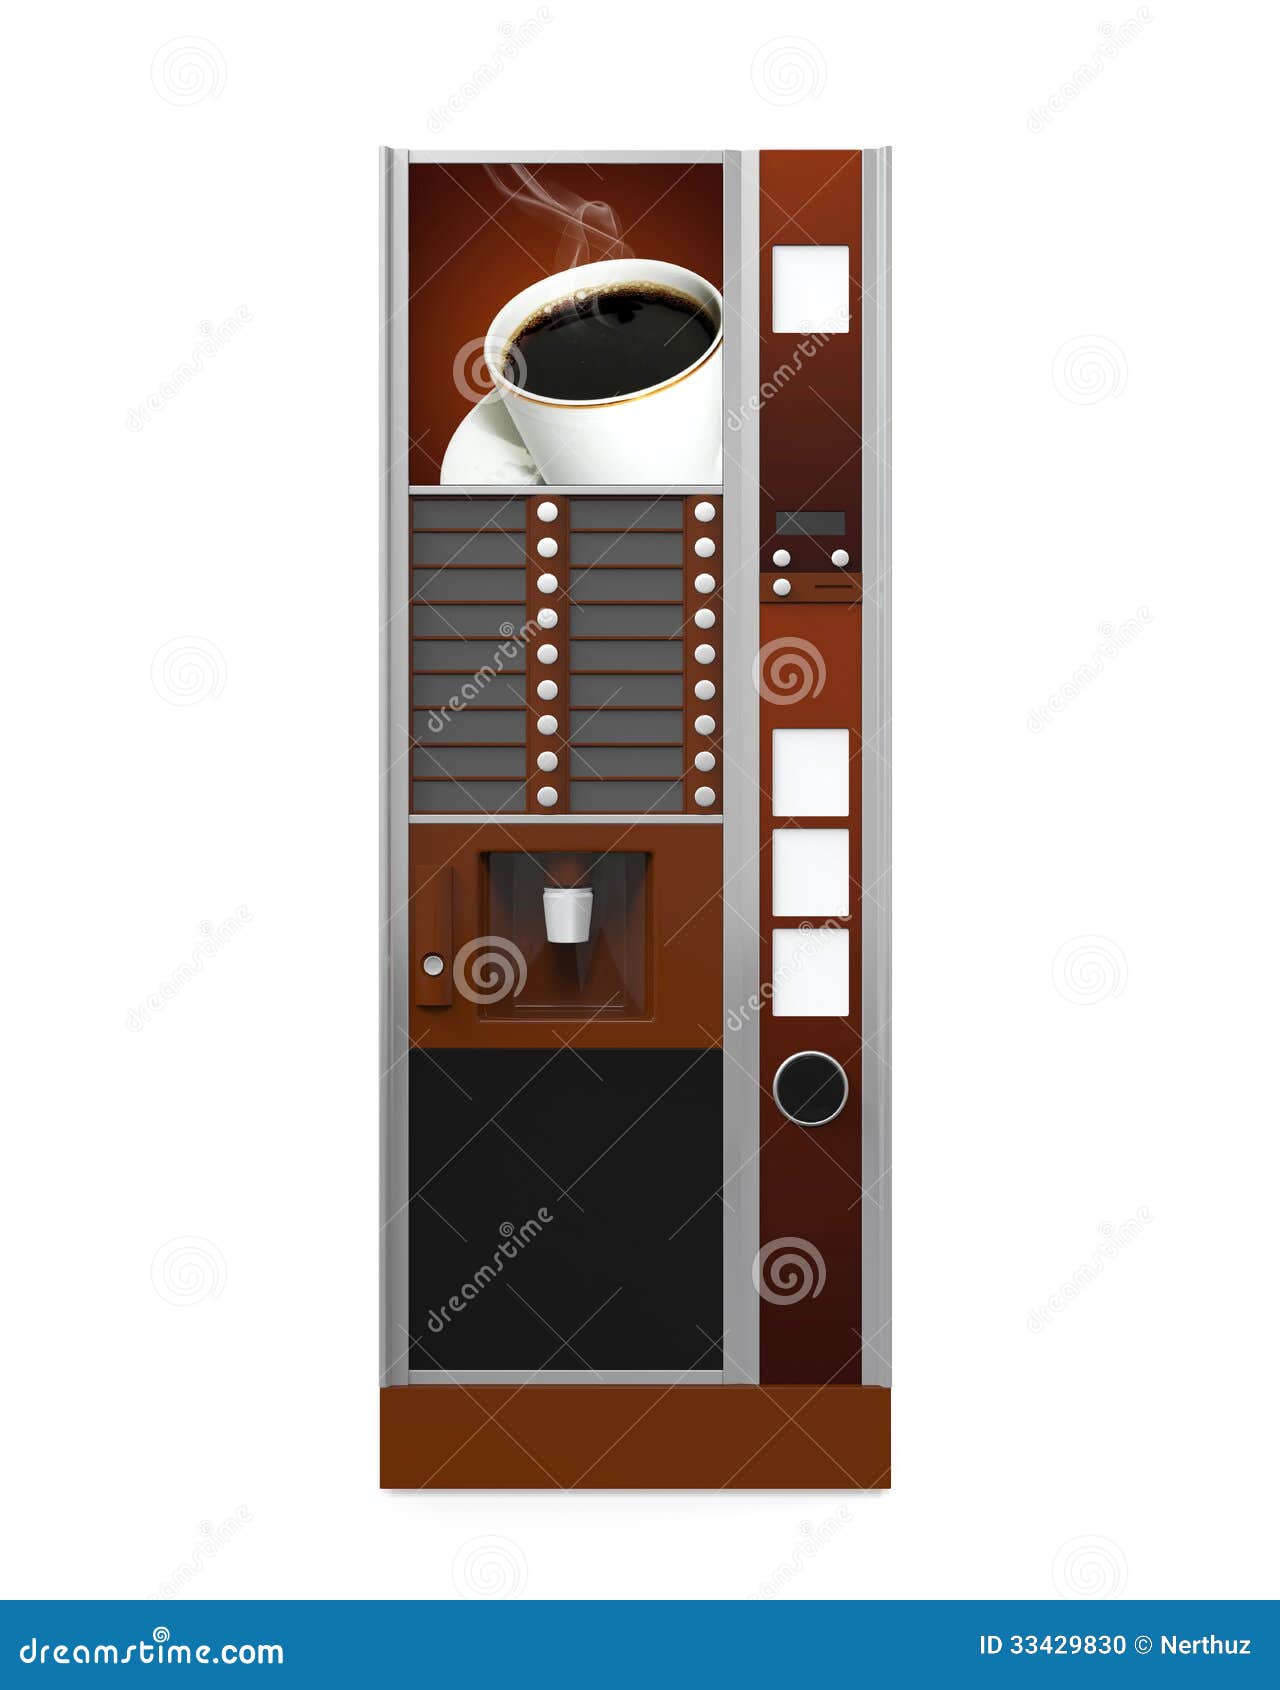 https://thumbs.dreamstime.com/z/coffee-vending-machine-isolated-white-background-d-render-33429830.jpg